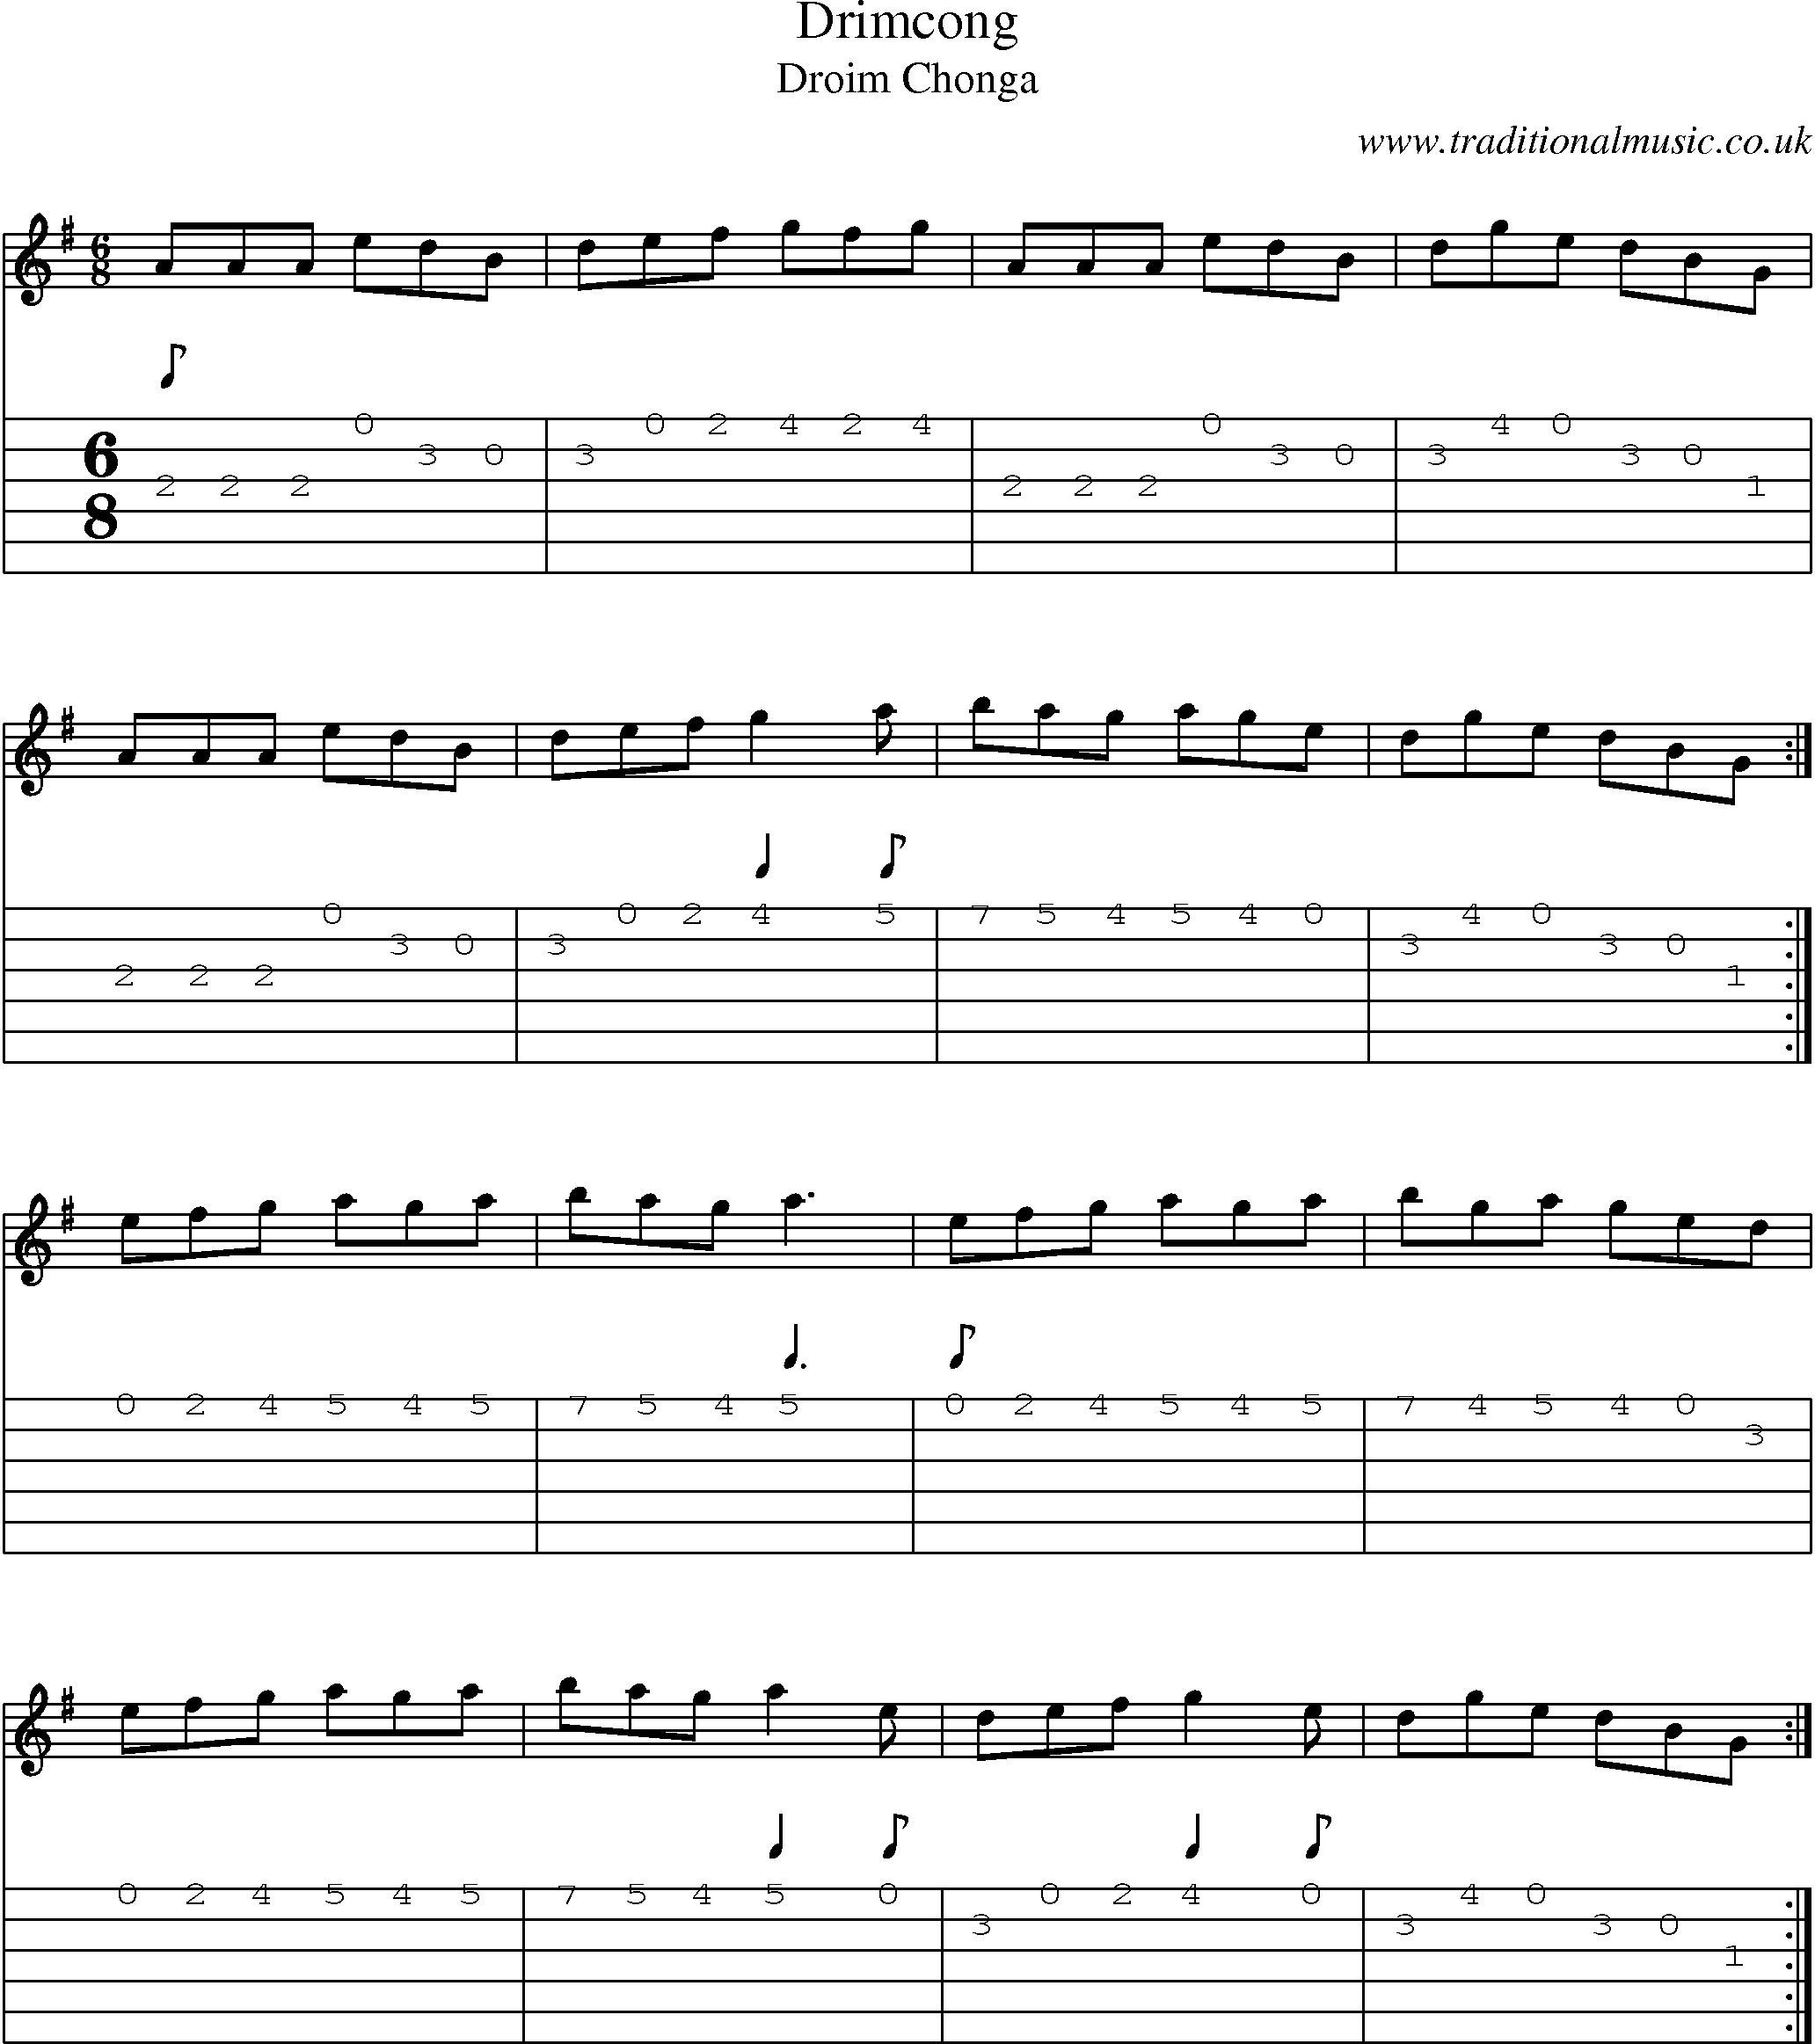 Music Score and Guitar Tabs for Drimcong